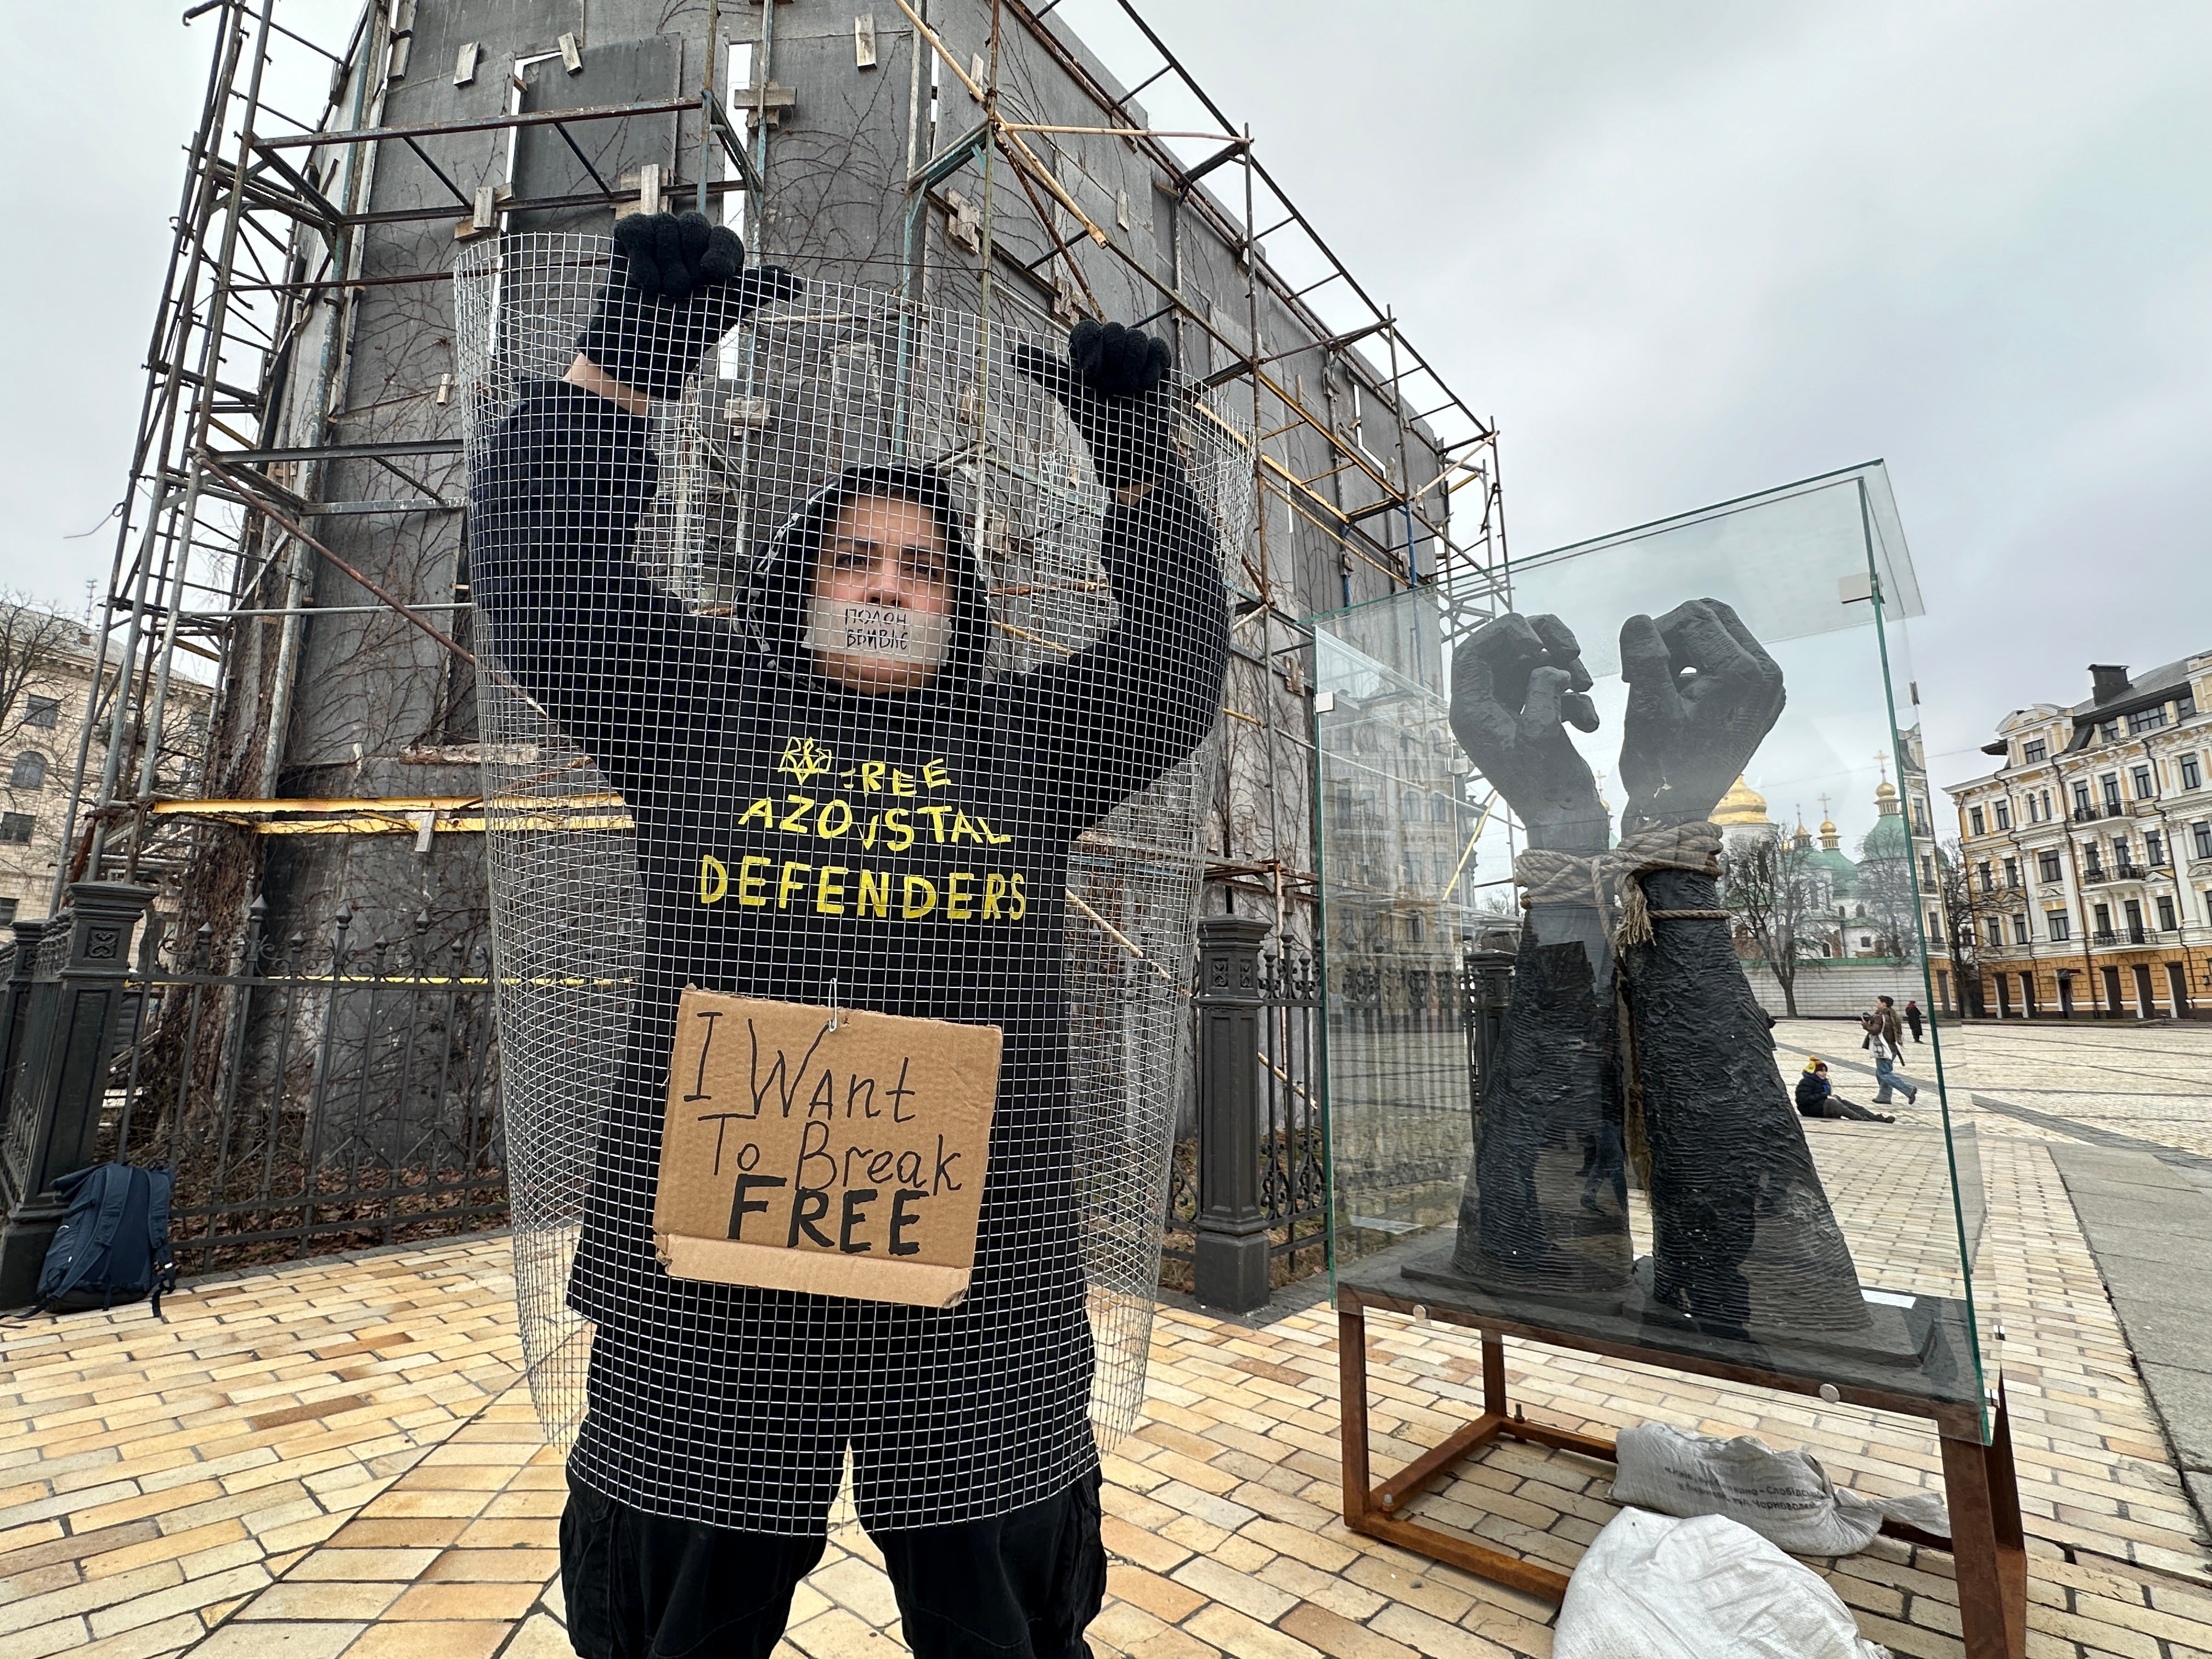 Protests in Sophia Square in Kyiv by families of prisoners held by Russia